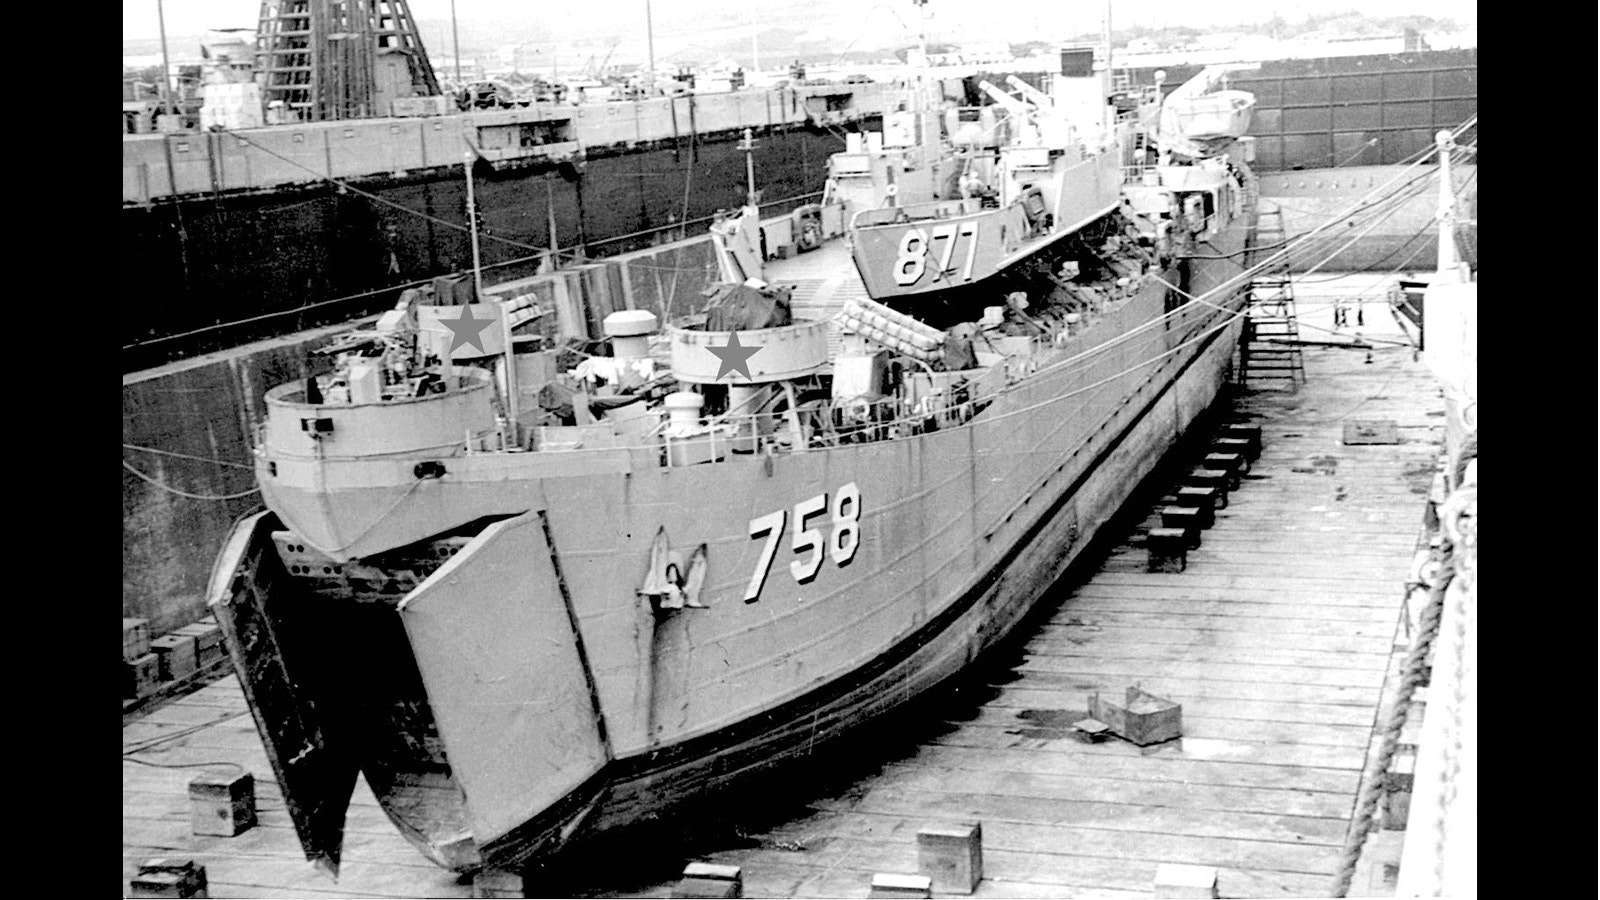 LST-758 show is in dry dock in 1960. Donald Siegel's gunner station would be one of the two platforms marked with stars located behind the twin 40 mm guns at the bow (front).